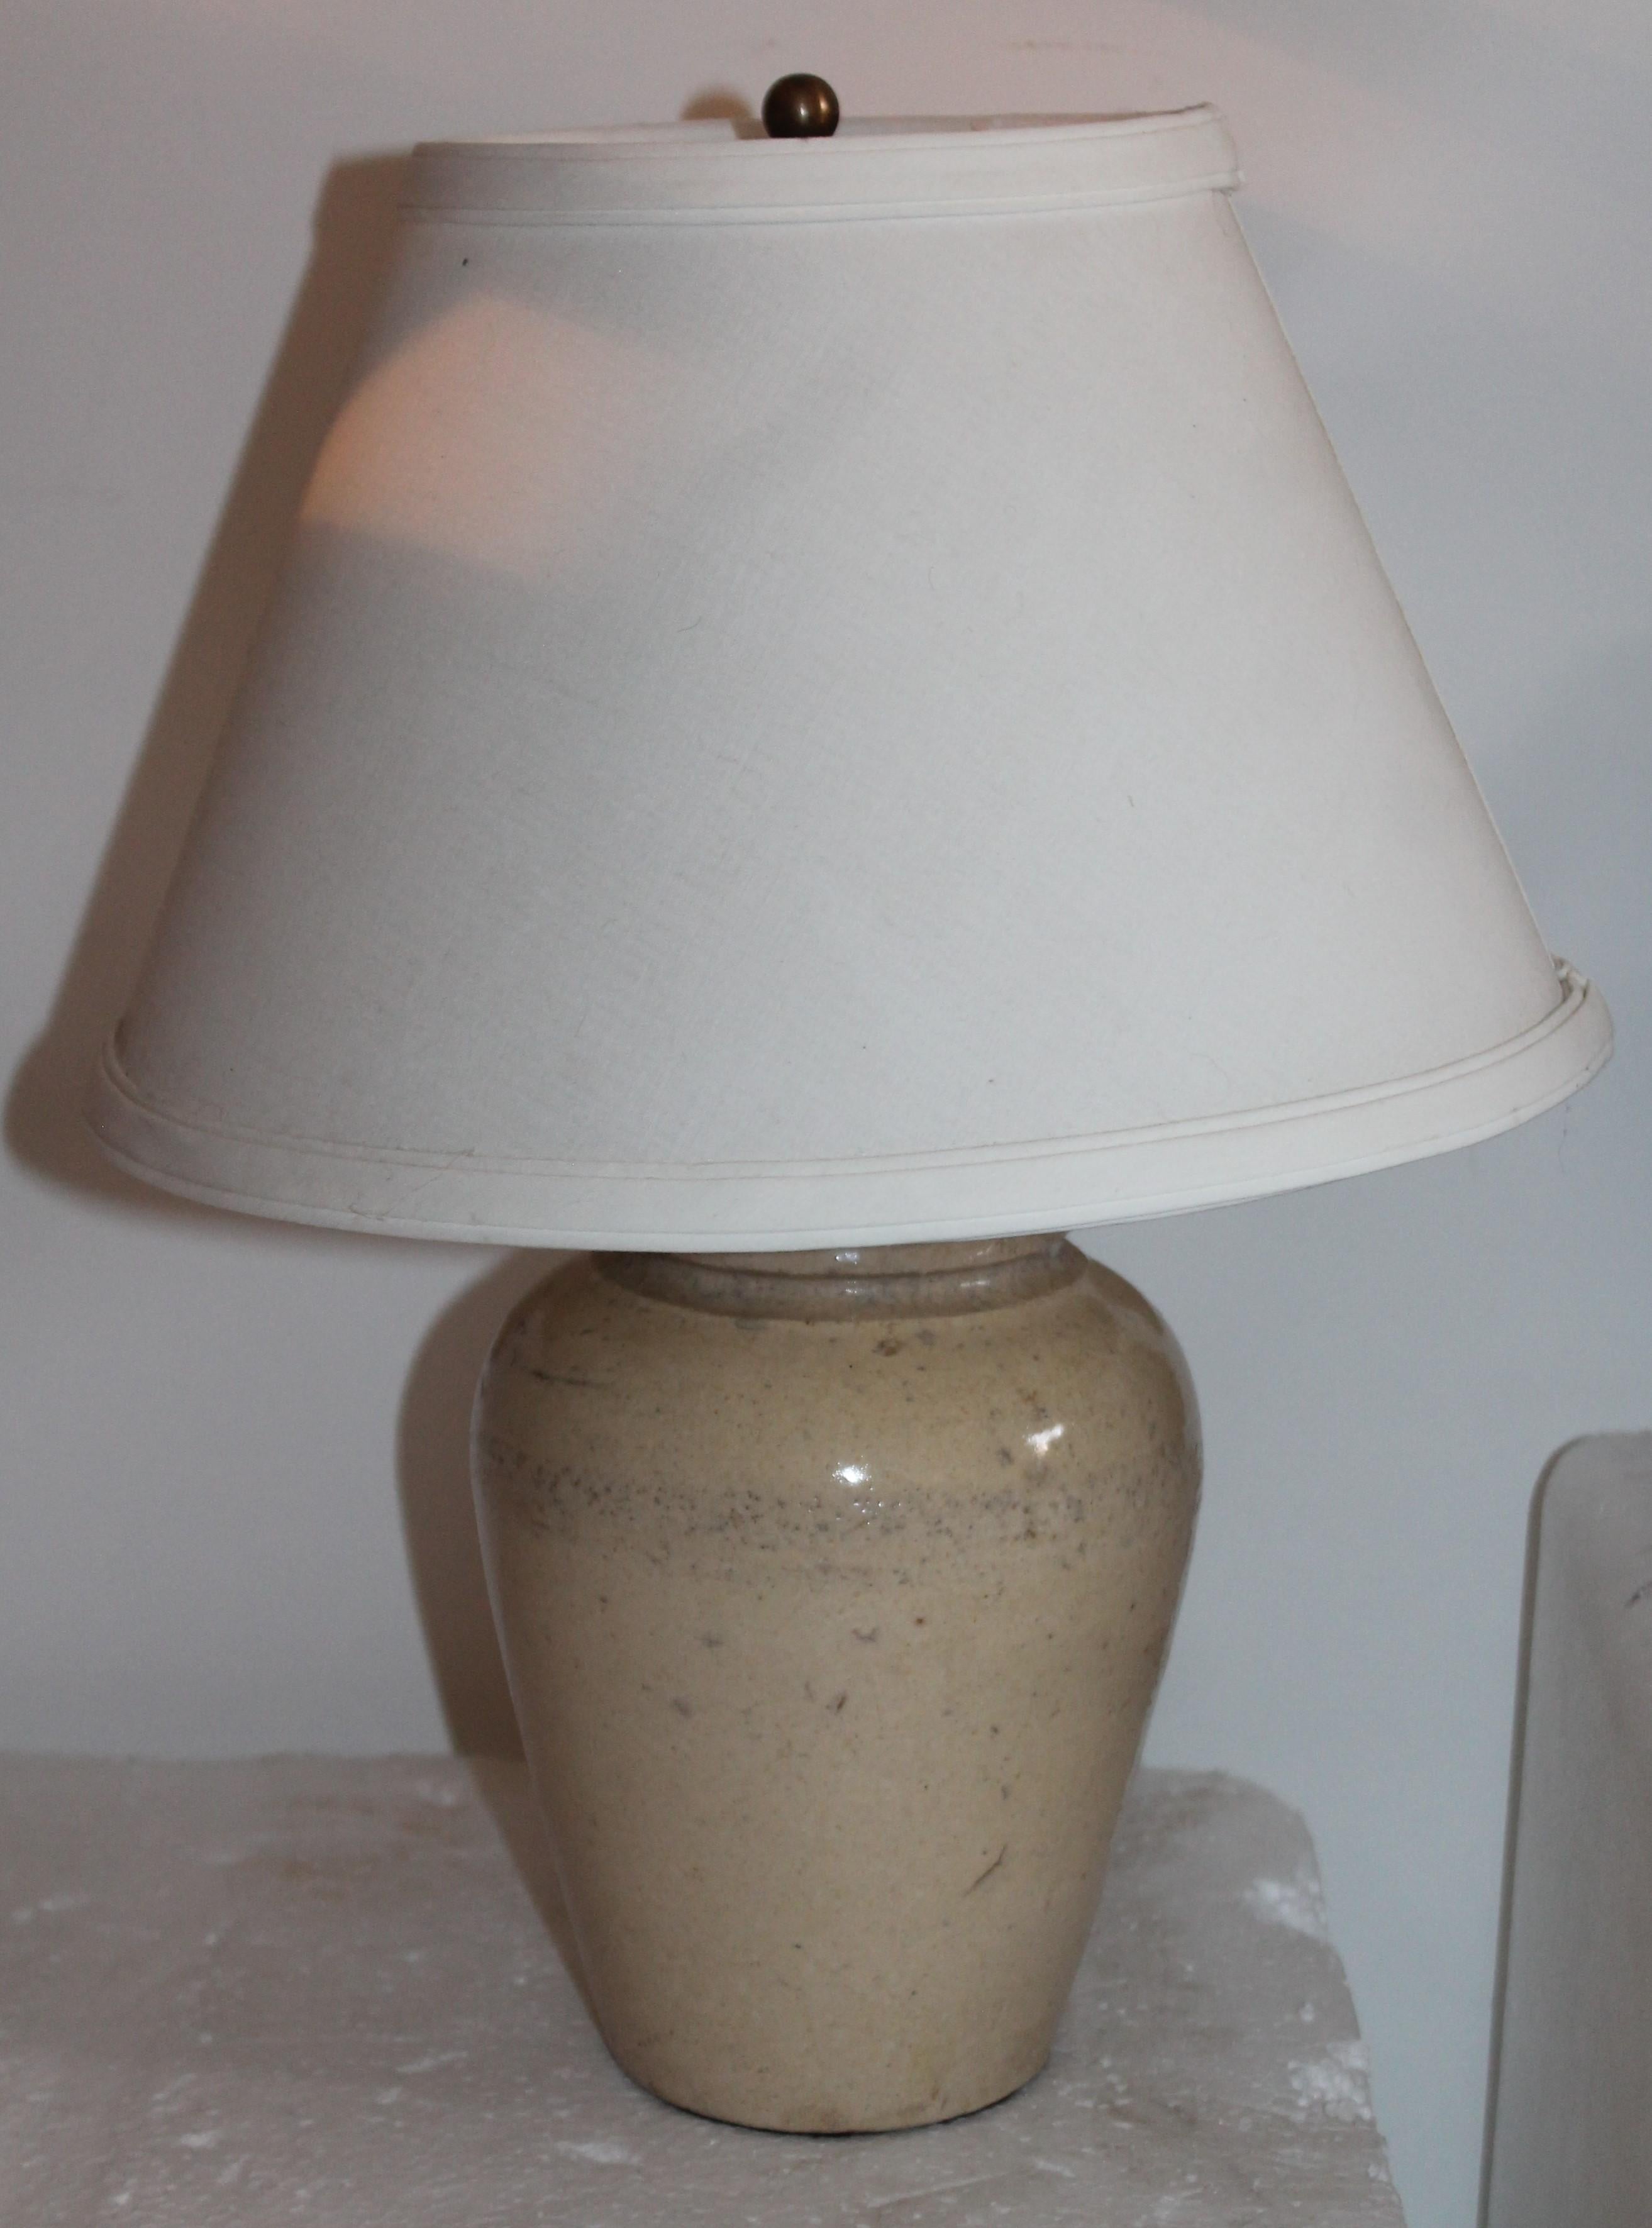 Table lamp shade measures 12 x 7.5. The condition is very good with this cream crock base.